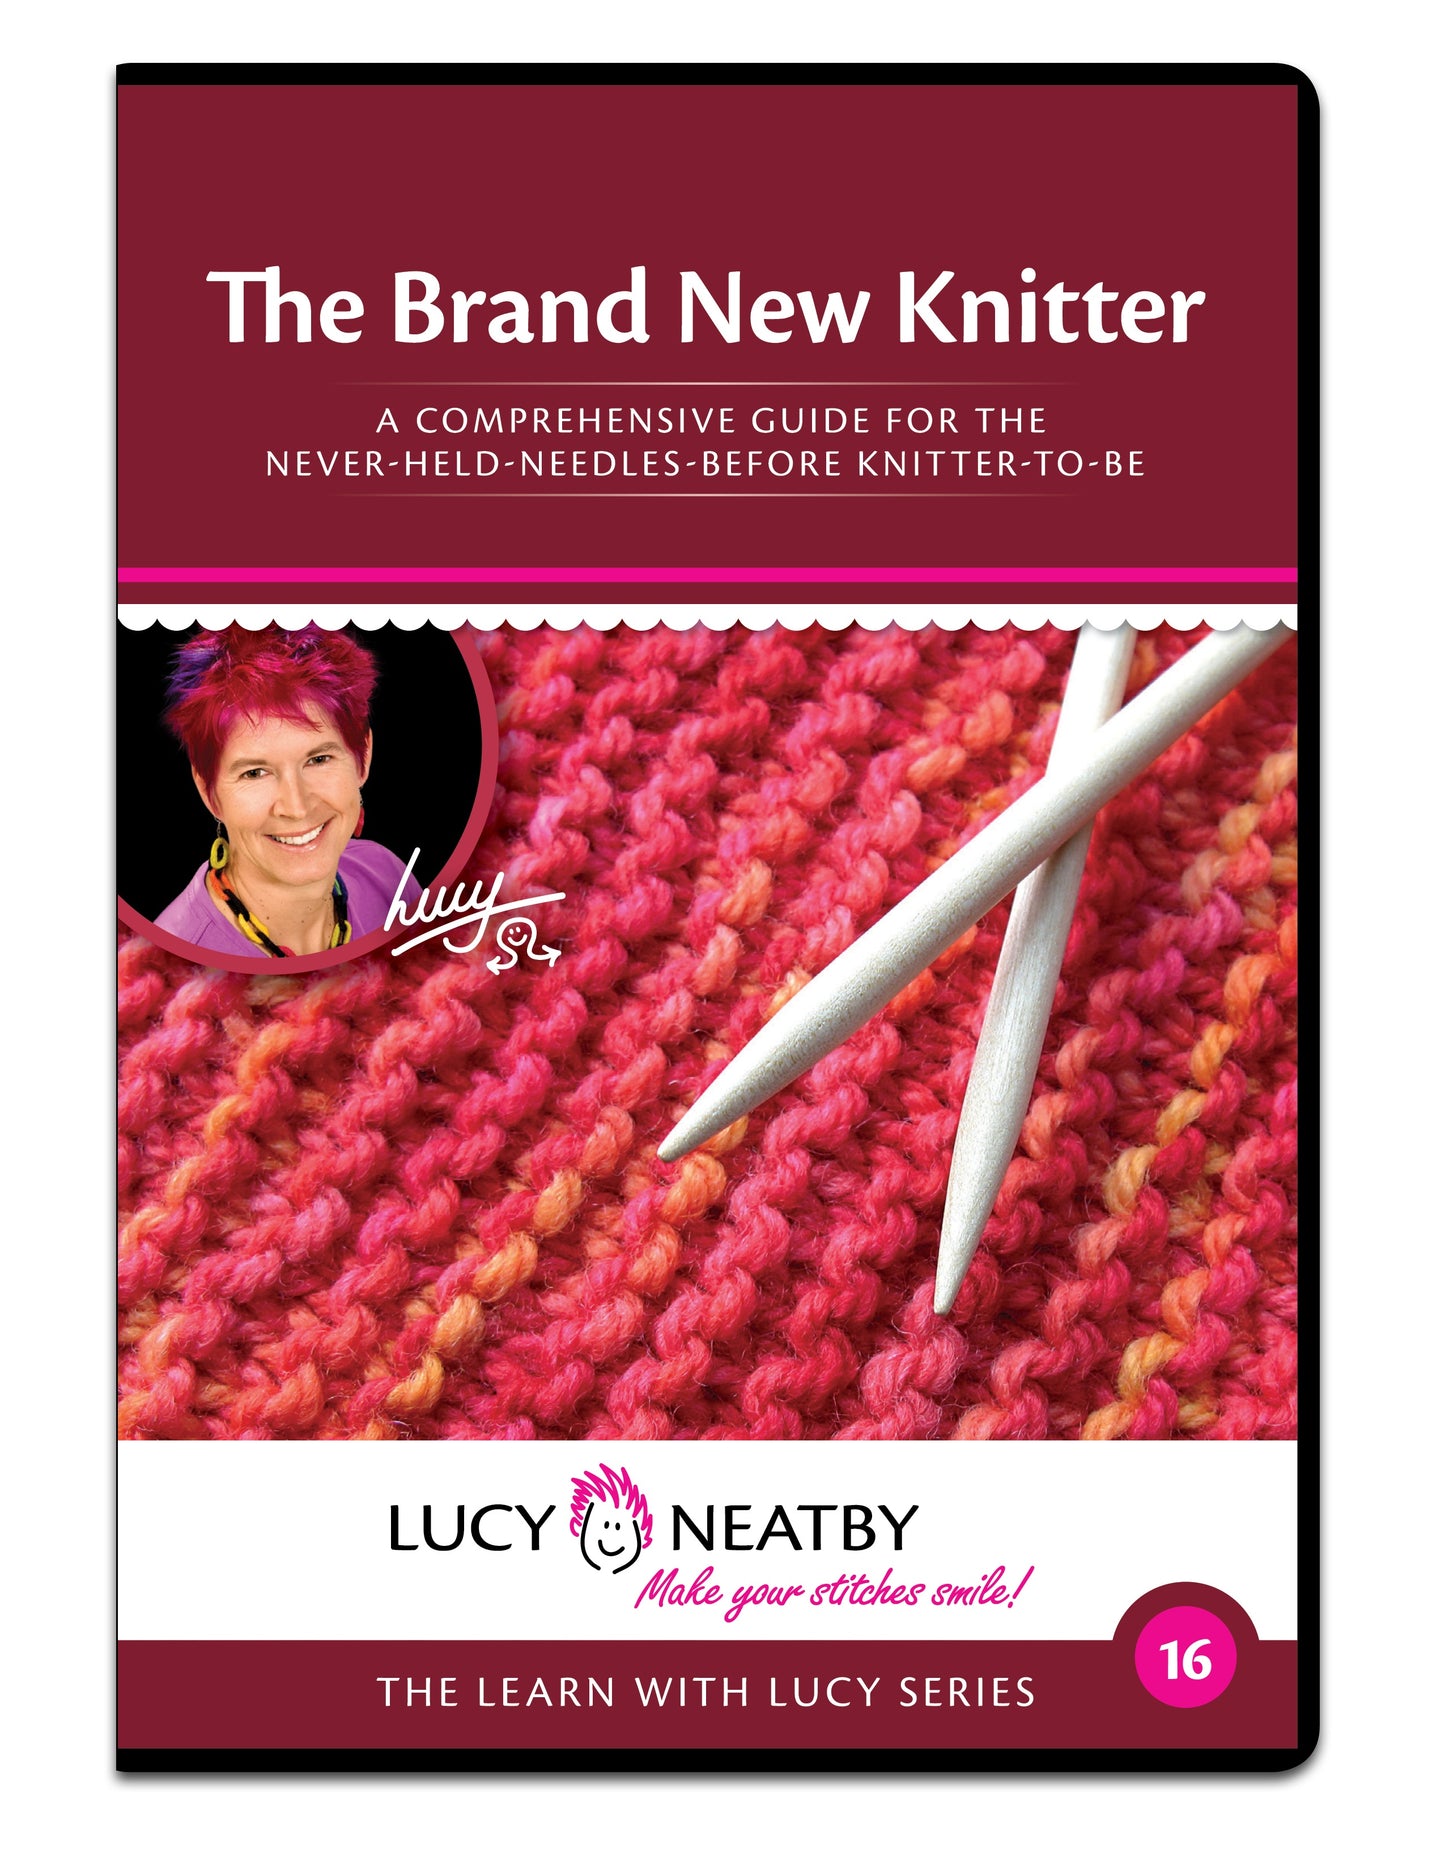 The Brand New Knitter by Lucy Neatby - online